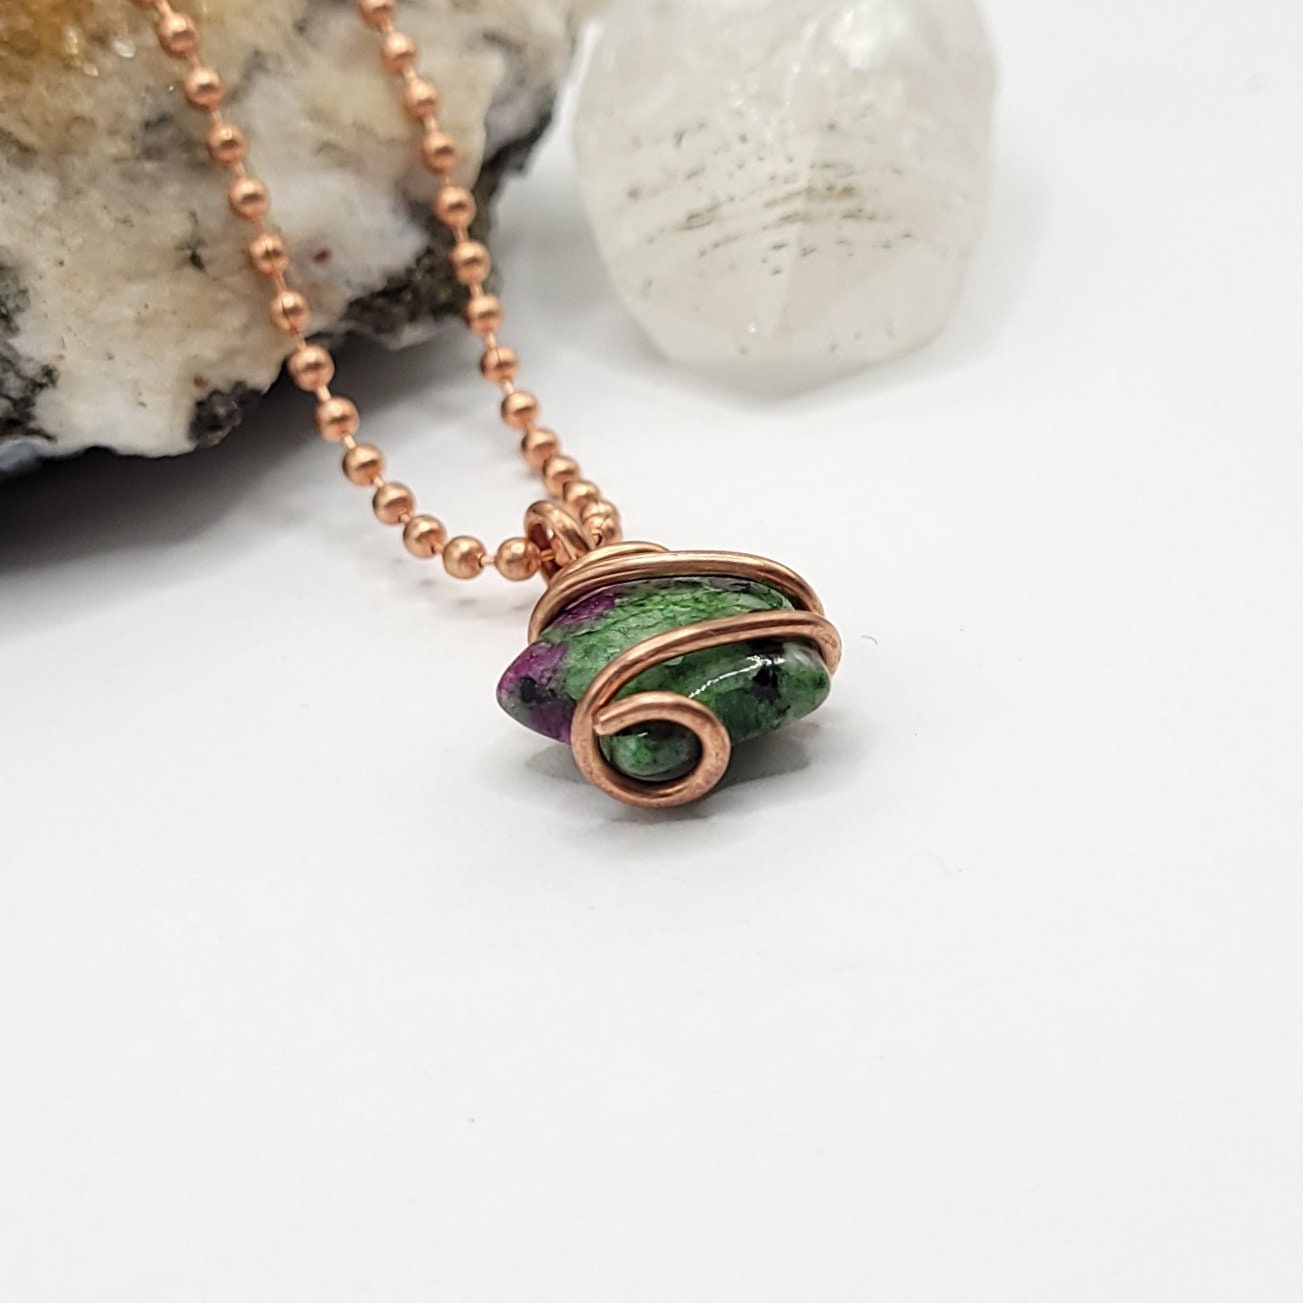 Ruby in Zoisite Star Necklace, Wire Wrapped Ruby in Zoisite Star Pendant | Promotes Happiness, Abundance and Growth